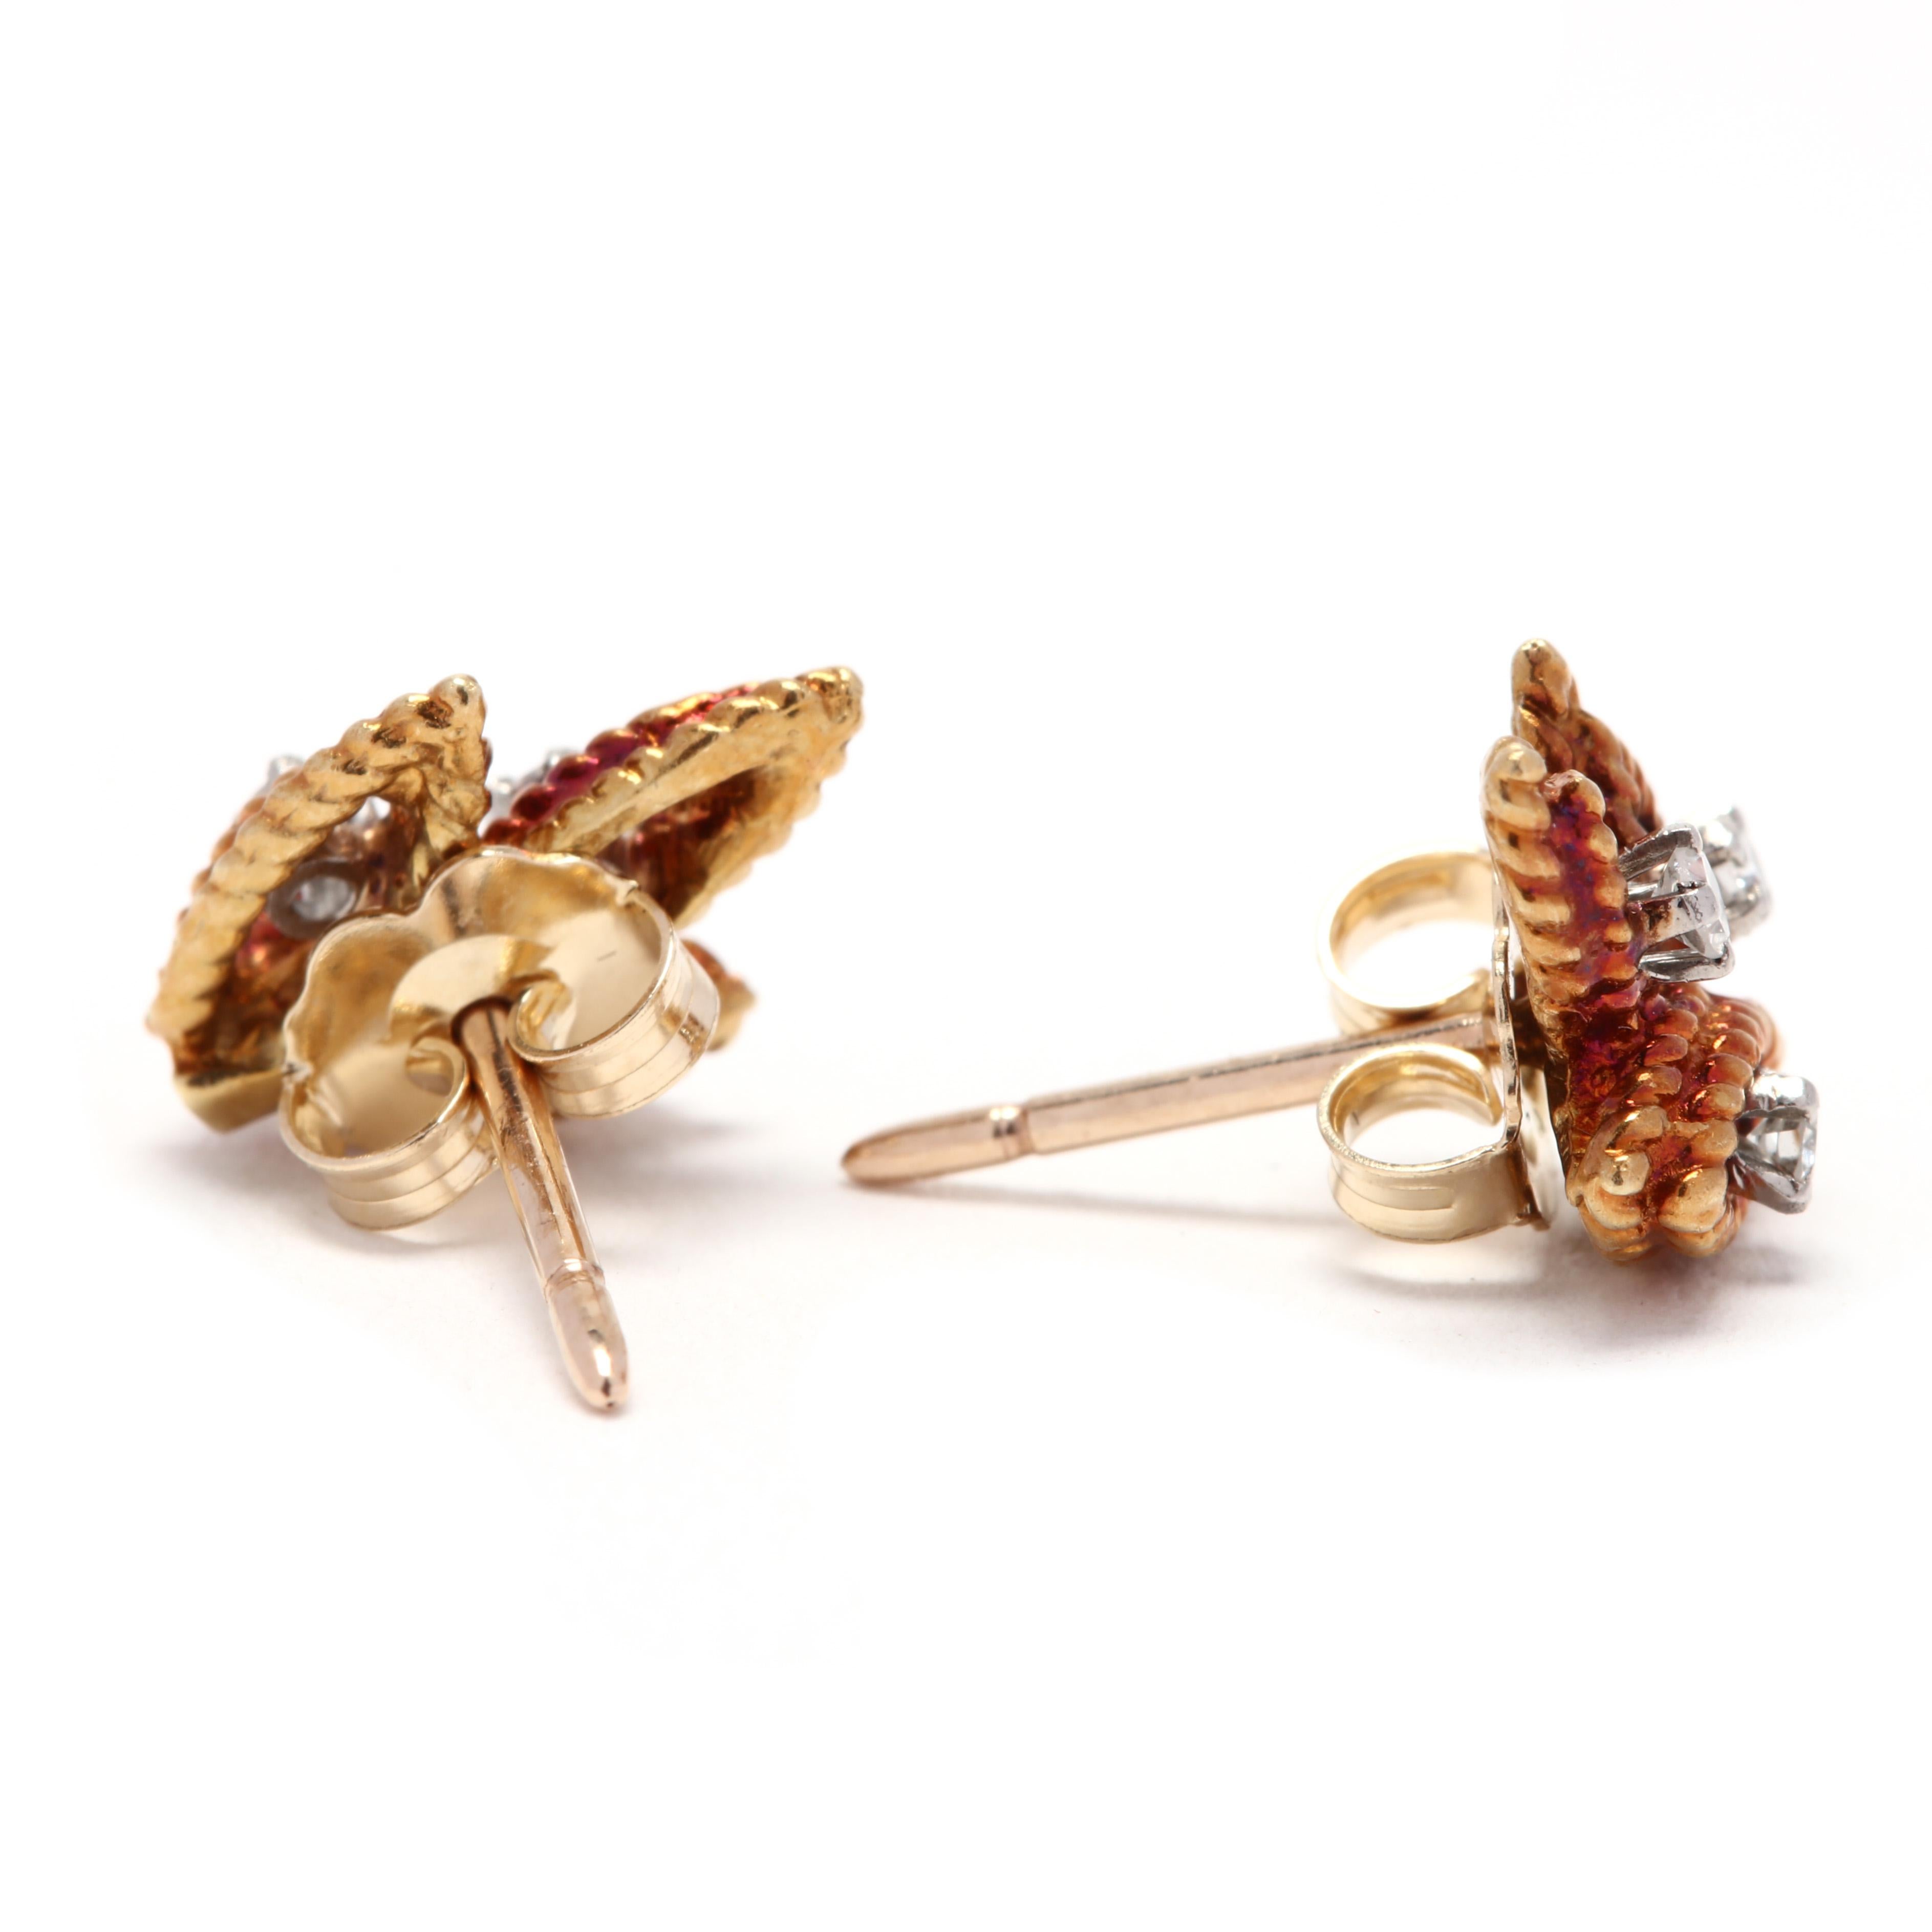 A pair of vintage 14 karat yellow gold and diamond leaf stud earrings. These earrings feature a three leaf design with a double row rope motif and each set with a full cut round diamond weighing approximately .12 total carats.

Stones:
- diamonds, 6